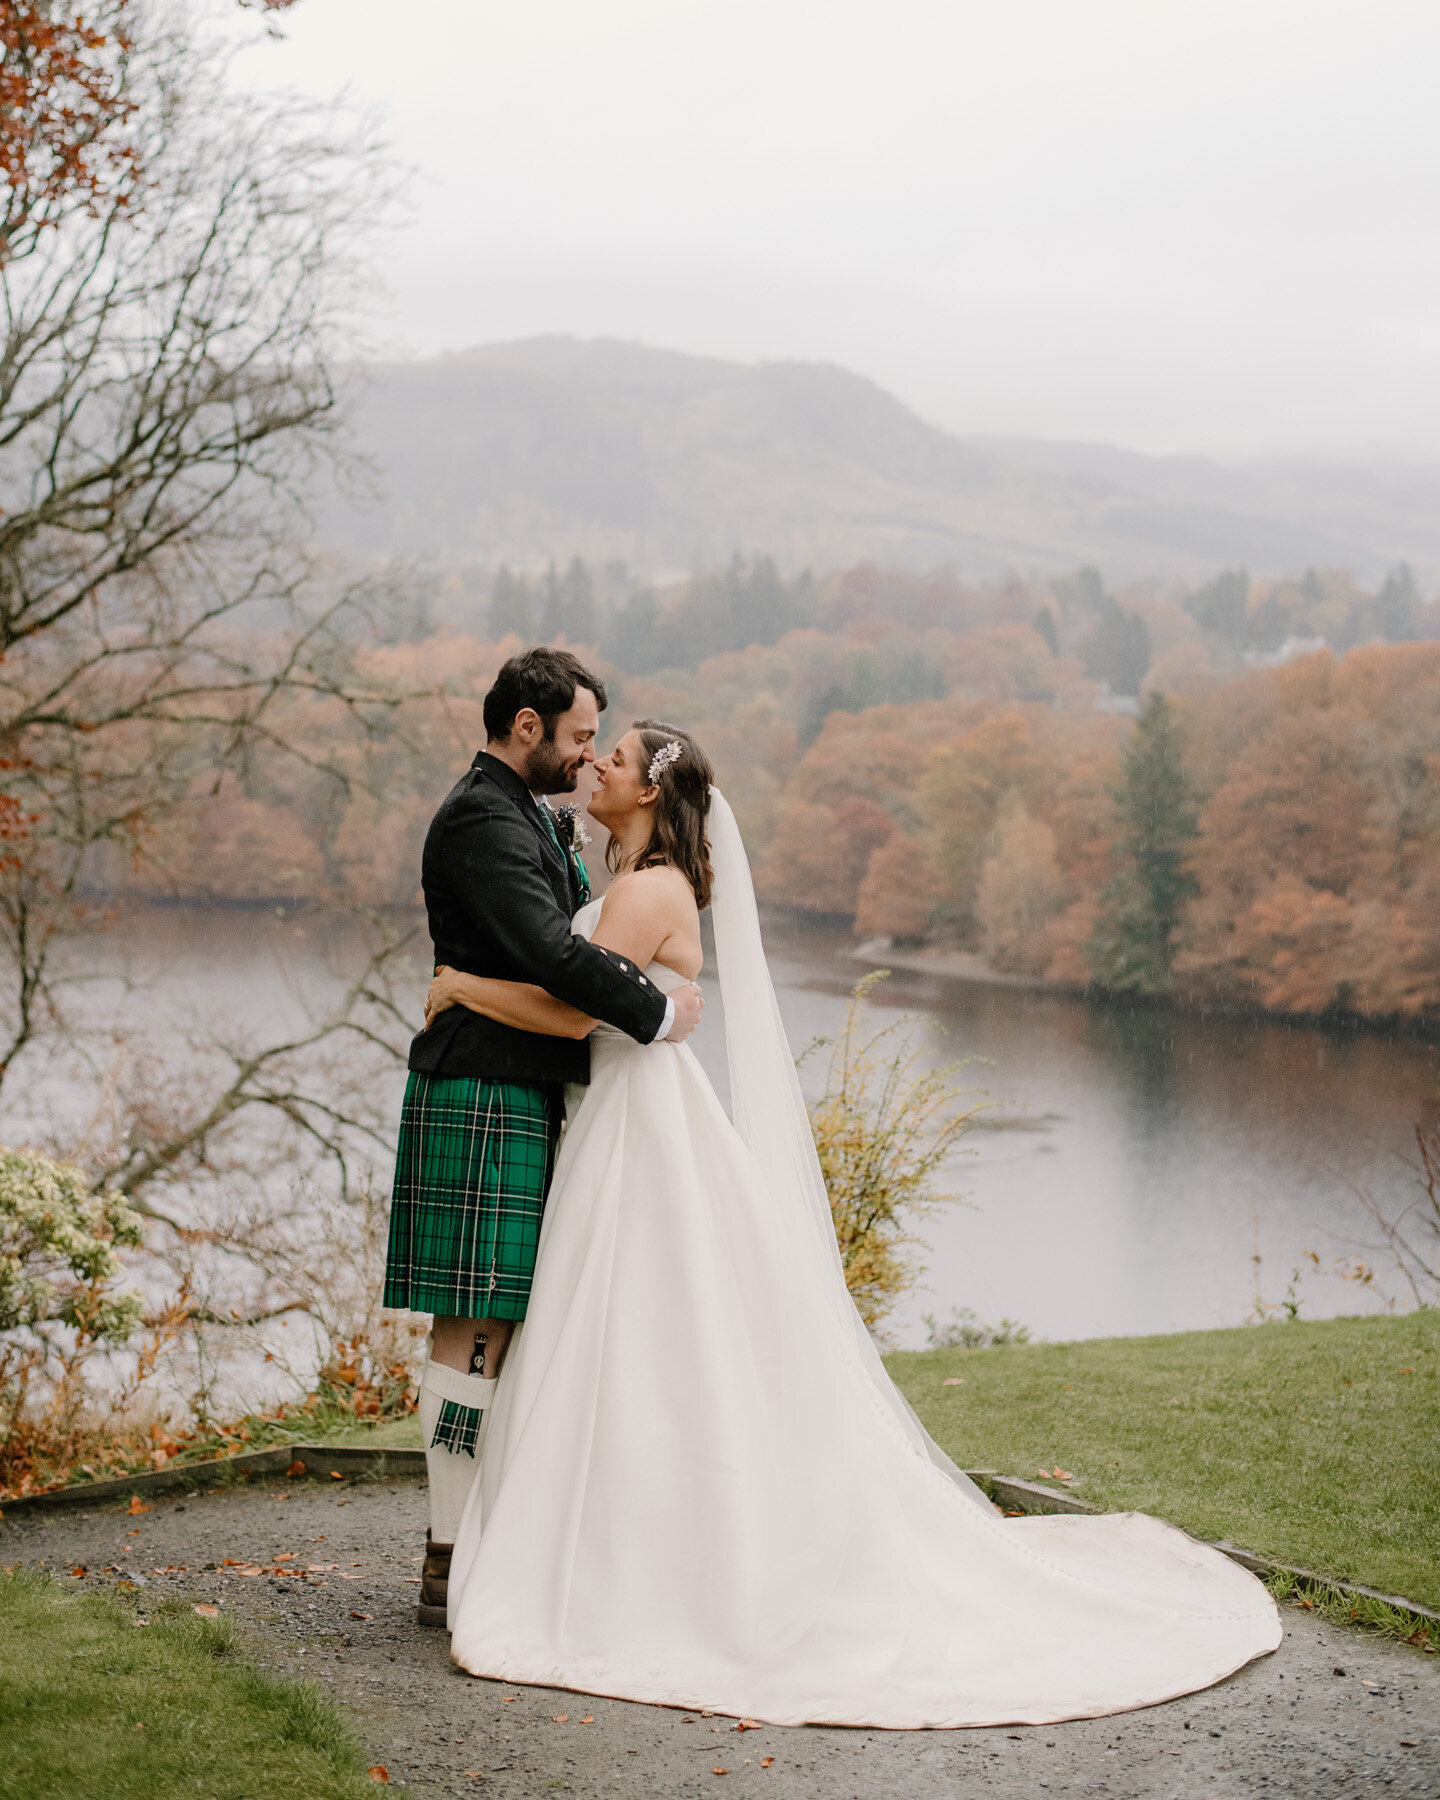 So much fun photographing Laura &amp; Kieran at the beautiful @fonabcastle after their elopement in Glasgow.